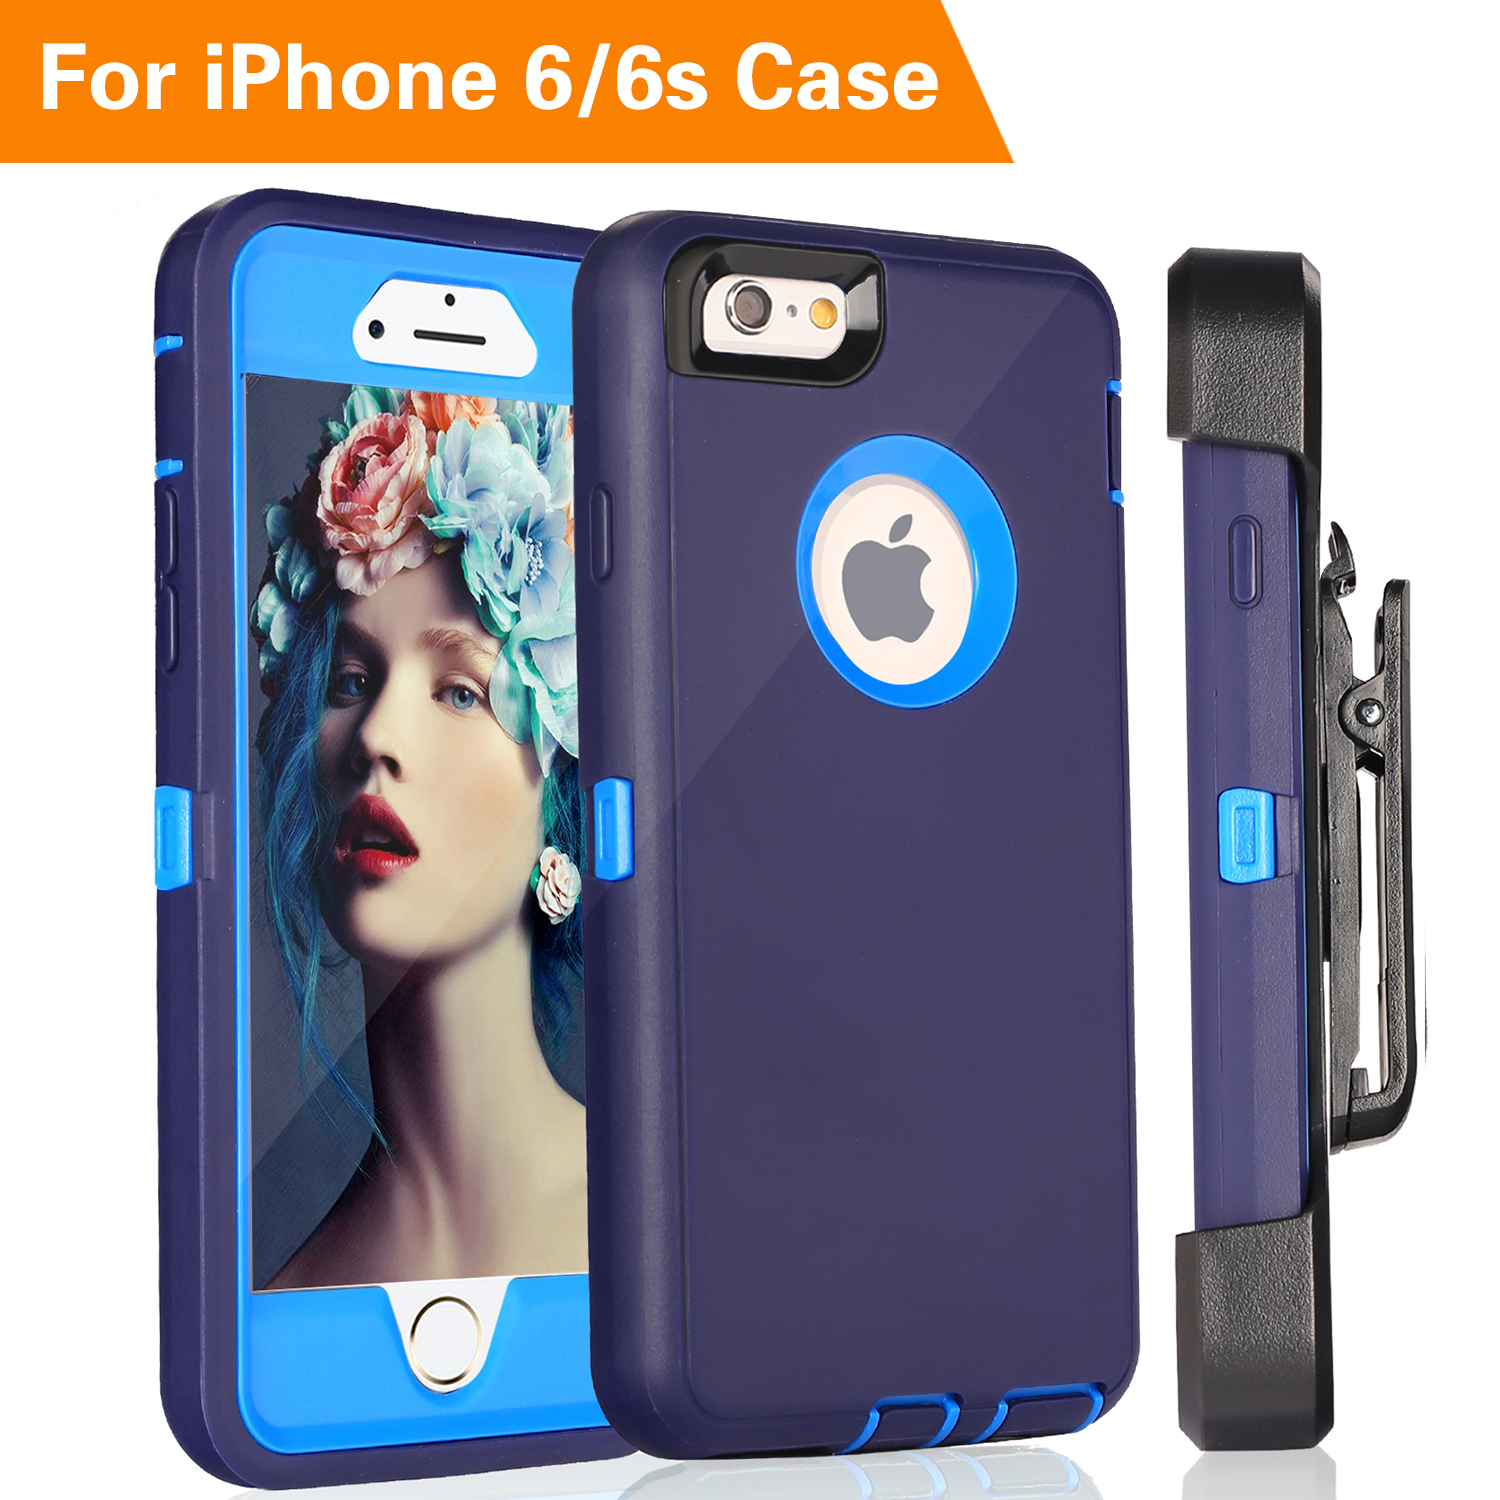 iPhone 5 Case, FogeekHeavy Duty PC + TPU Combo Protective Defender Body Armor Case for iPhone 5 & iPhone 5S(Blue/Orange)